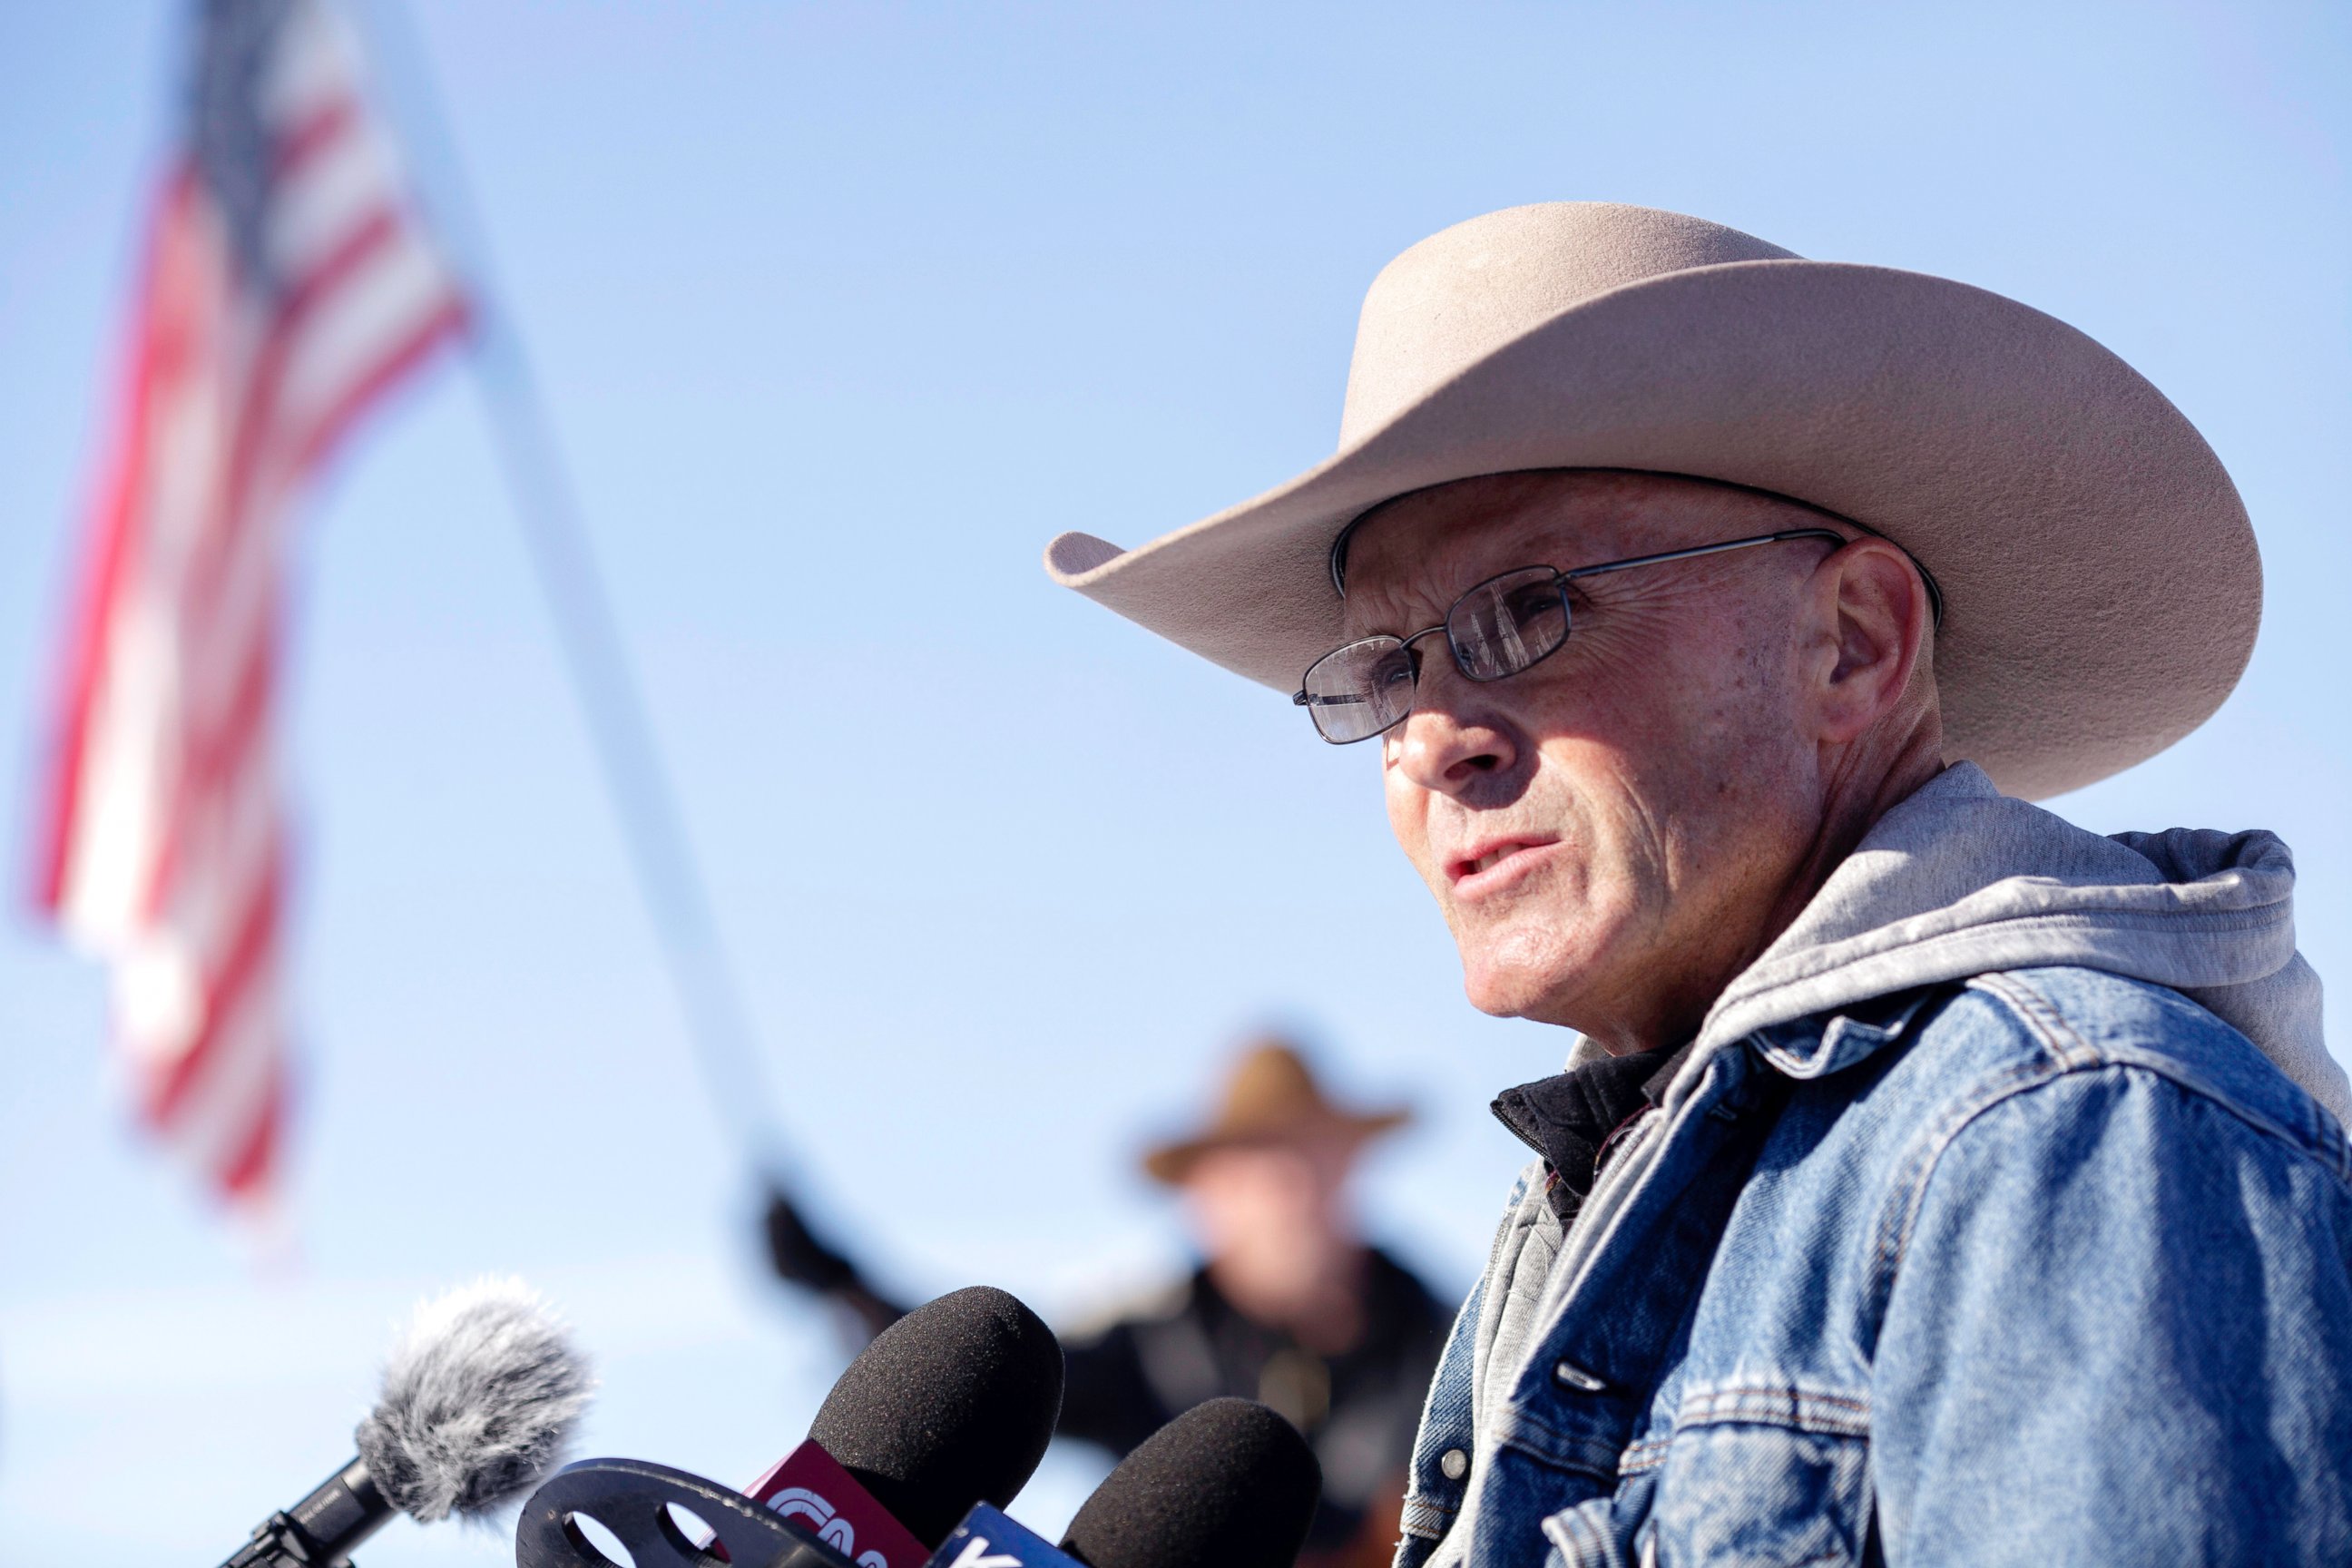 PHOTO: Robert "LaVoy" Finicum is pictured here near the occupied Malheur National Wildlife Refuge Headquarters.